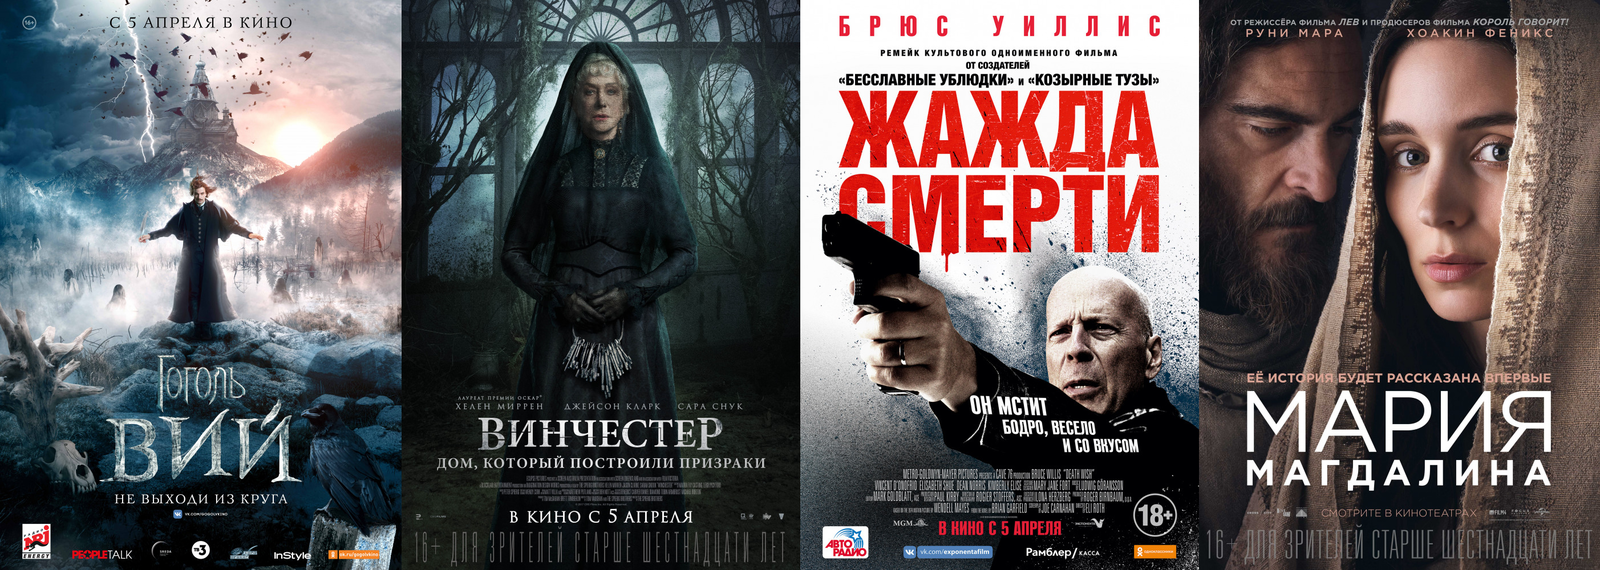 Russian box office receipts and distribution of screenings over the past weekend (April 5 - 8) - Movies, Viy, Death Wish, Mary Magdalene, Box office fees, Film distribution